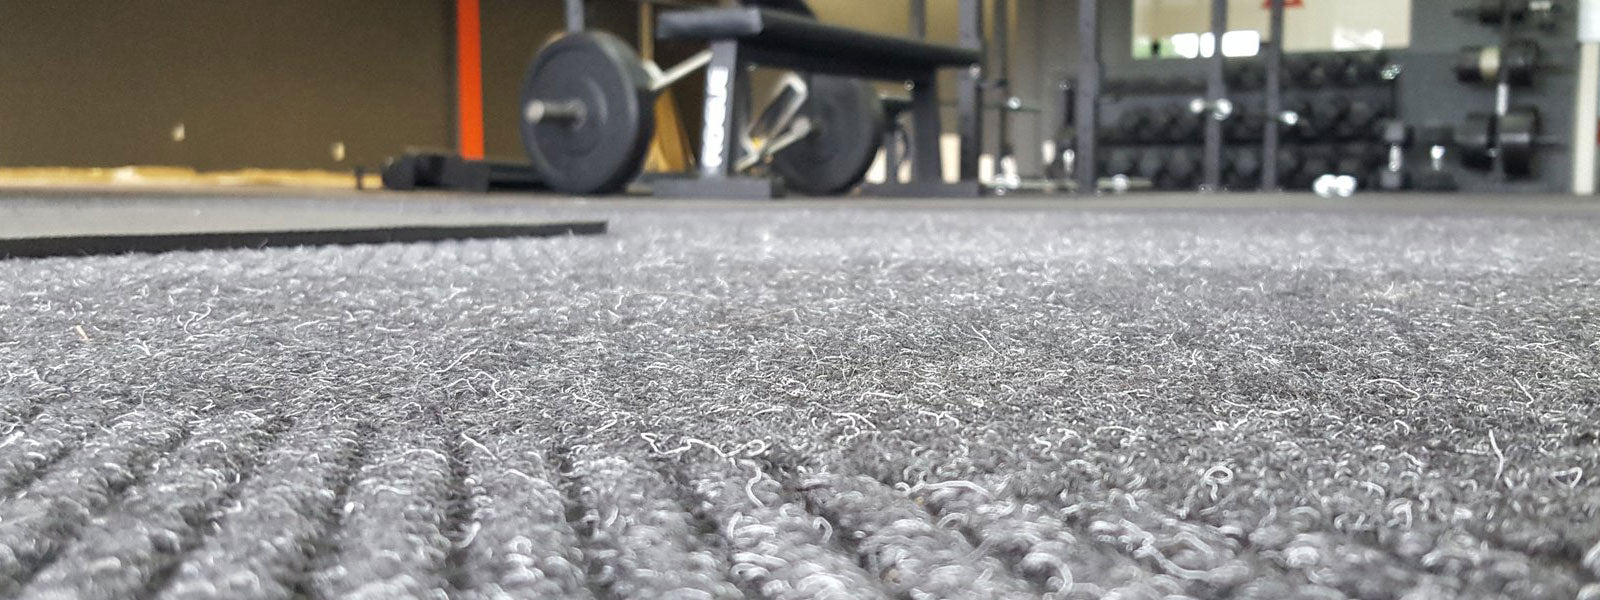 FitFloors® - Rubber Gym Flooring & Fitness Mats - Made in the USA